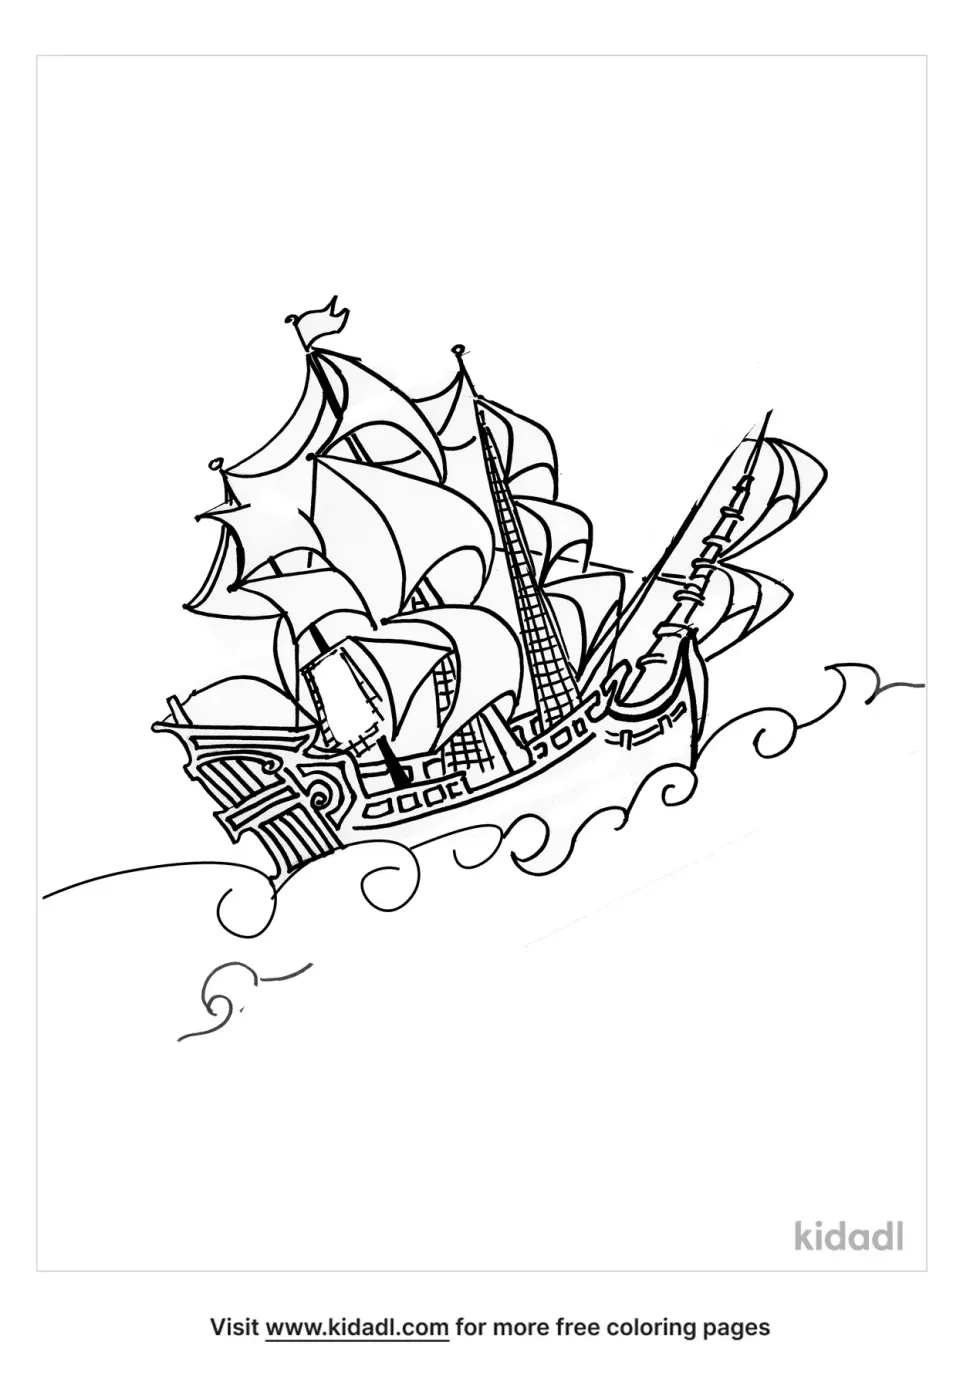 Sunken Ship Coloring Page